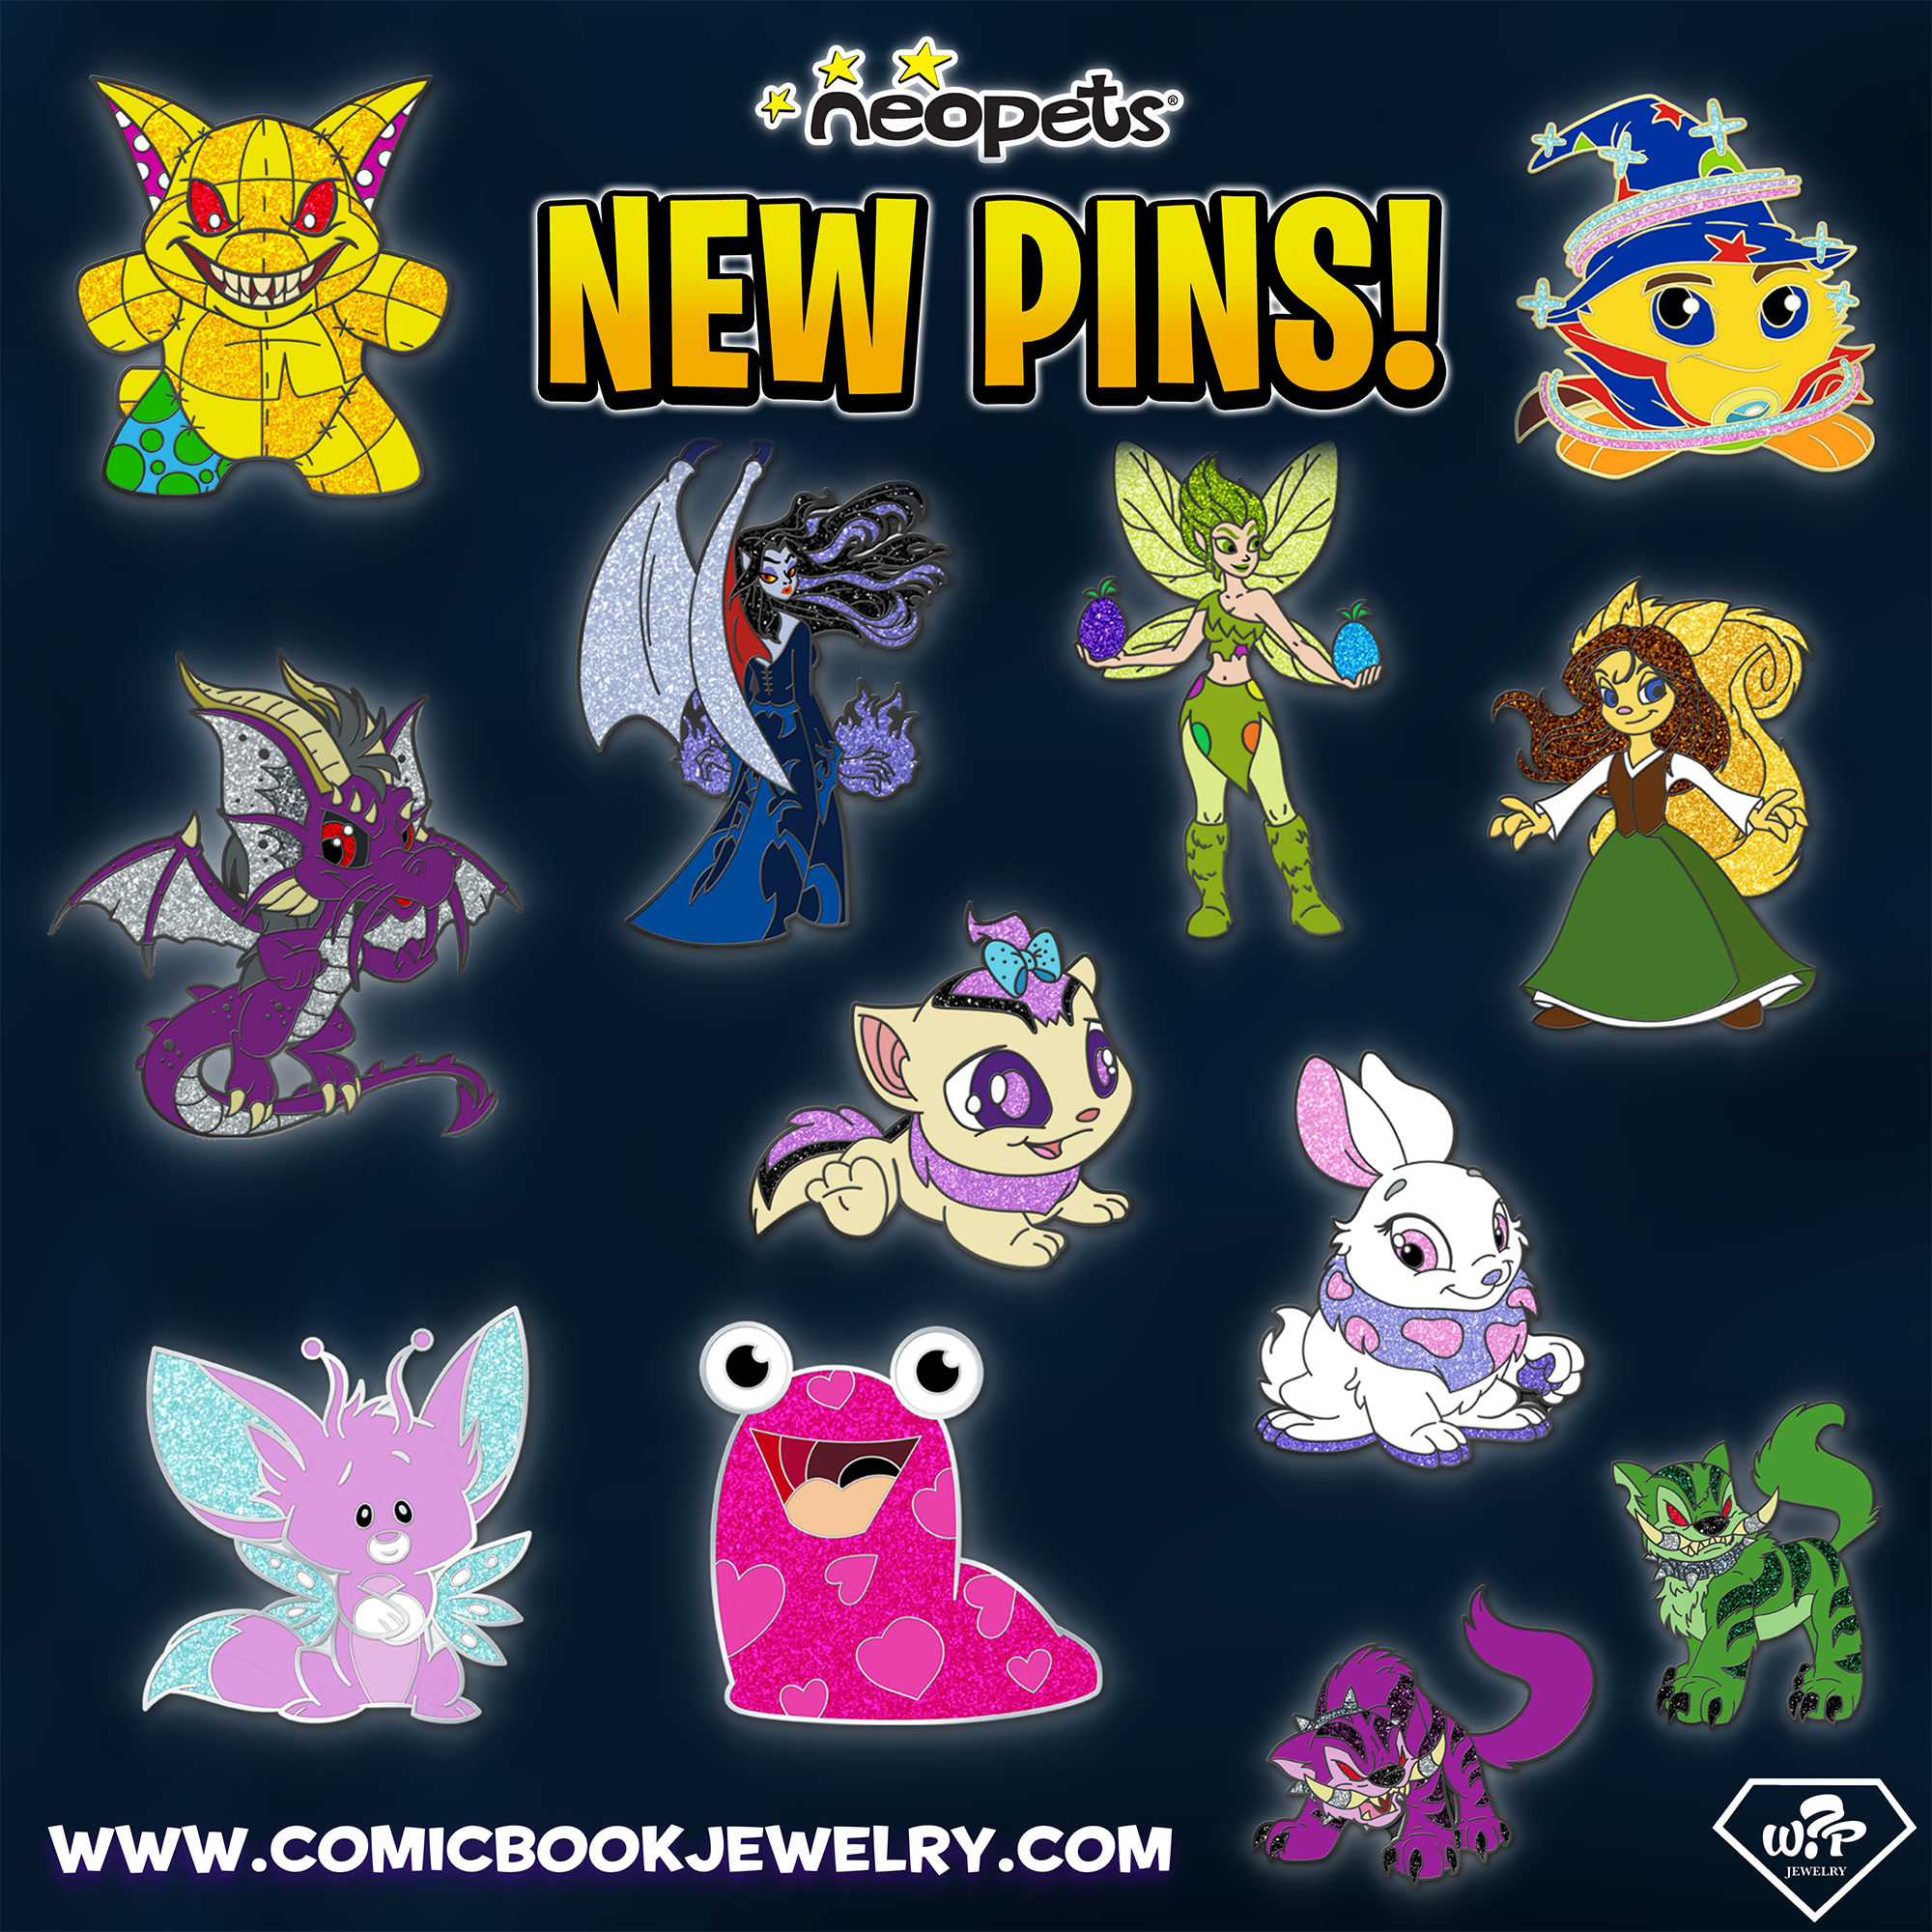 https://images.neopets.com/images/nf/wyp_new_pins.png